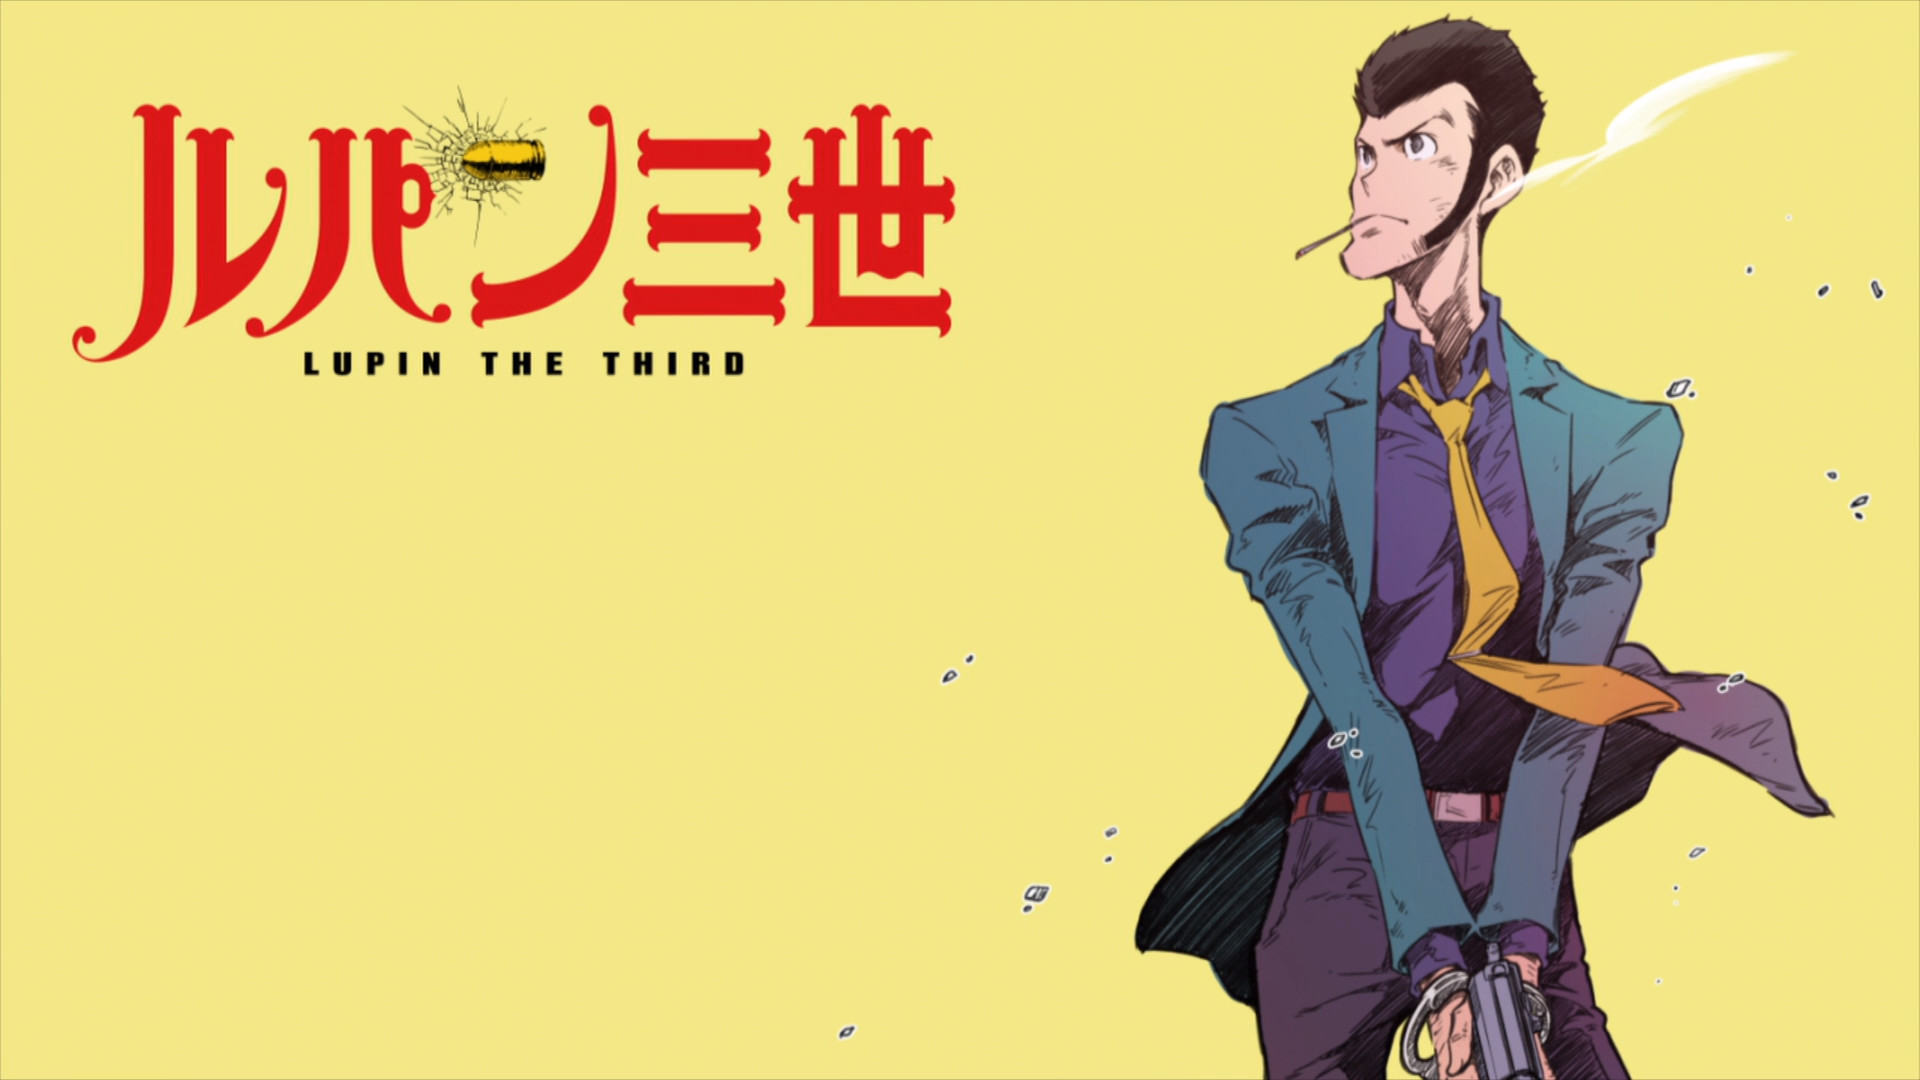 Lupin The Third Wallpaper.